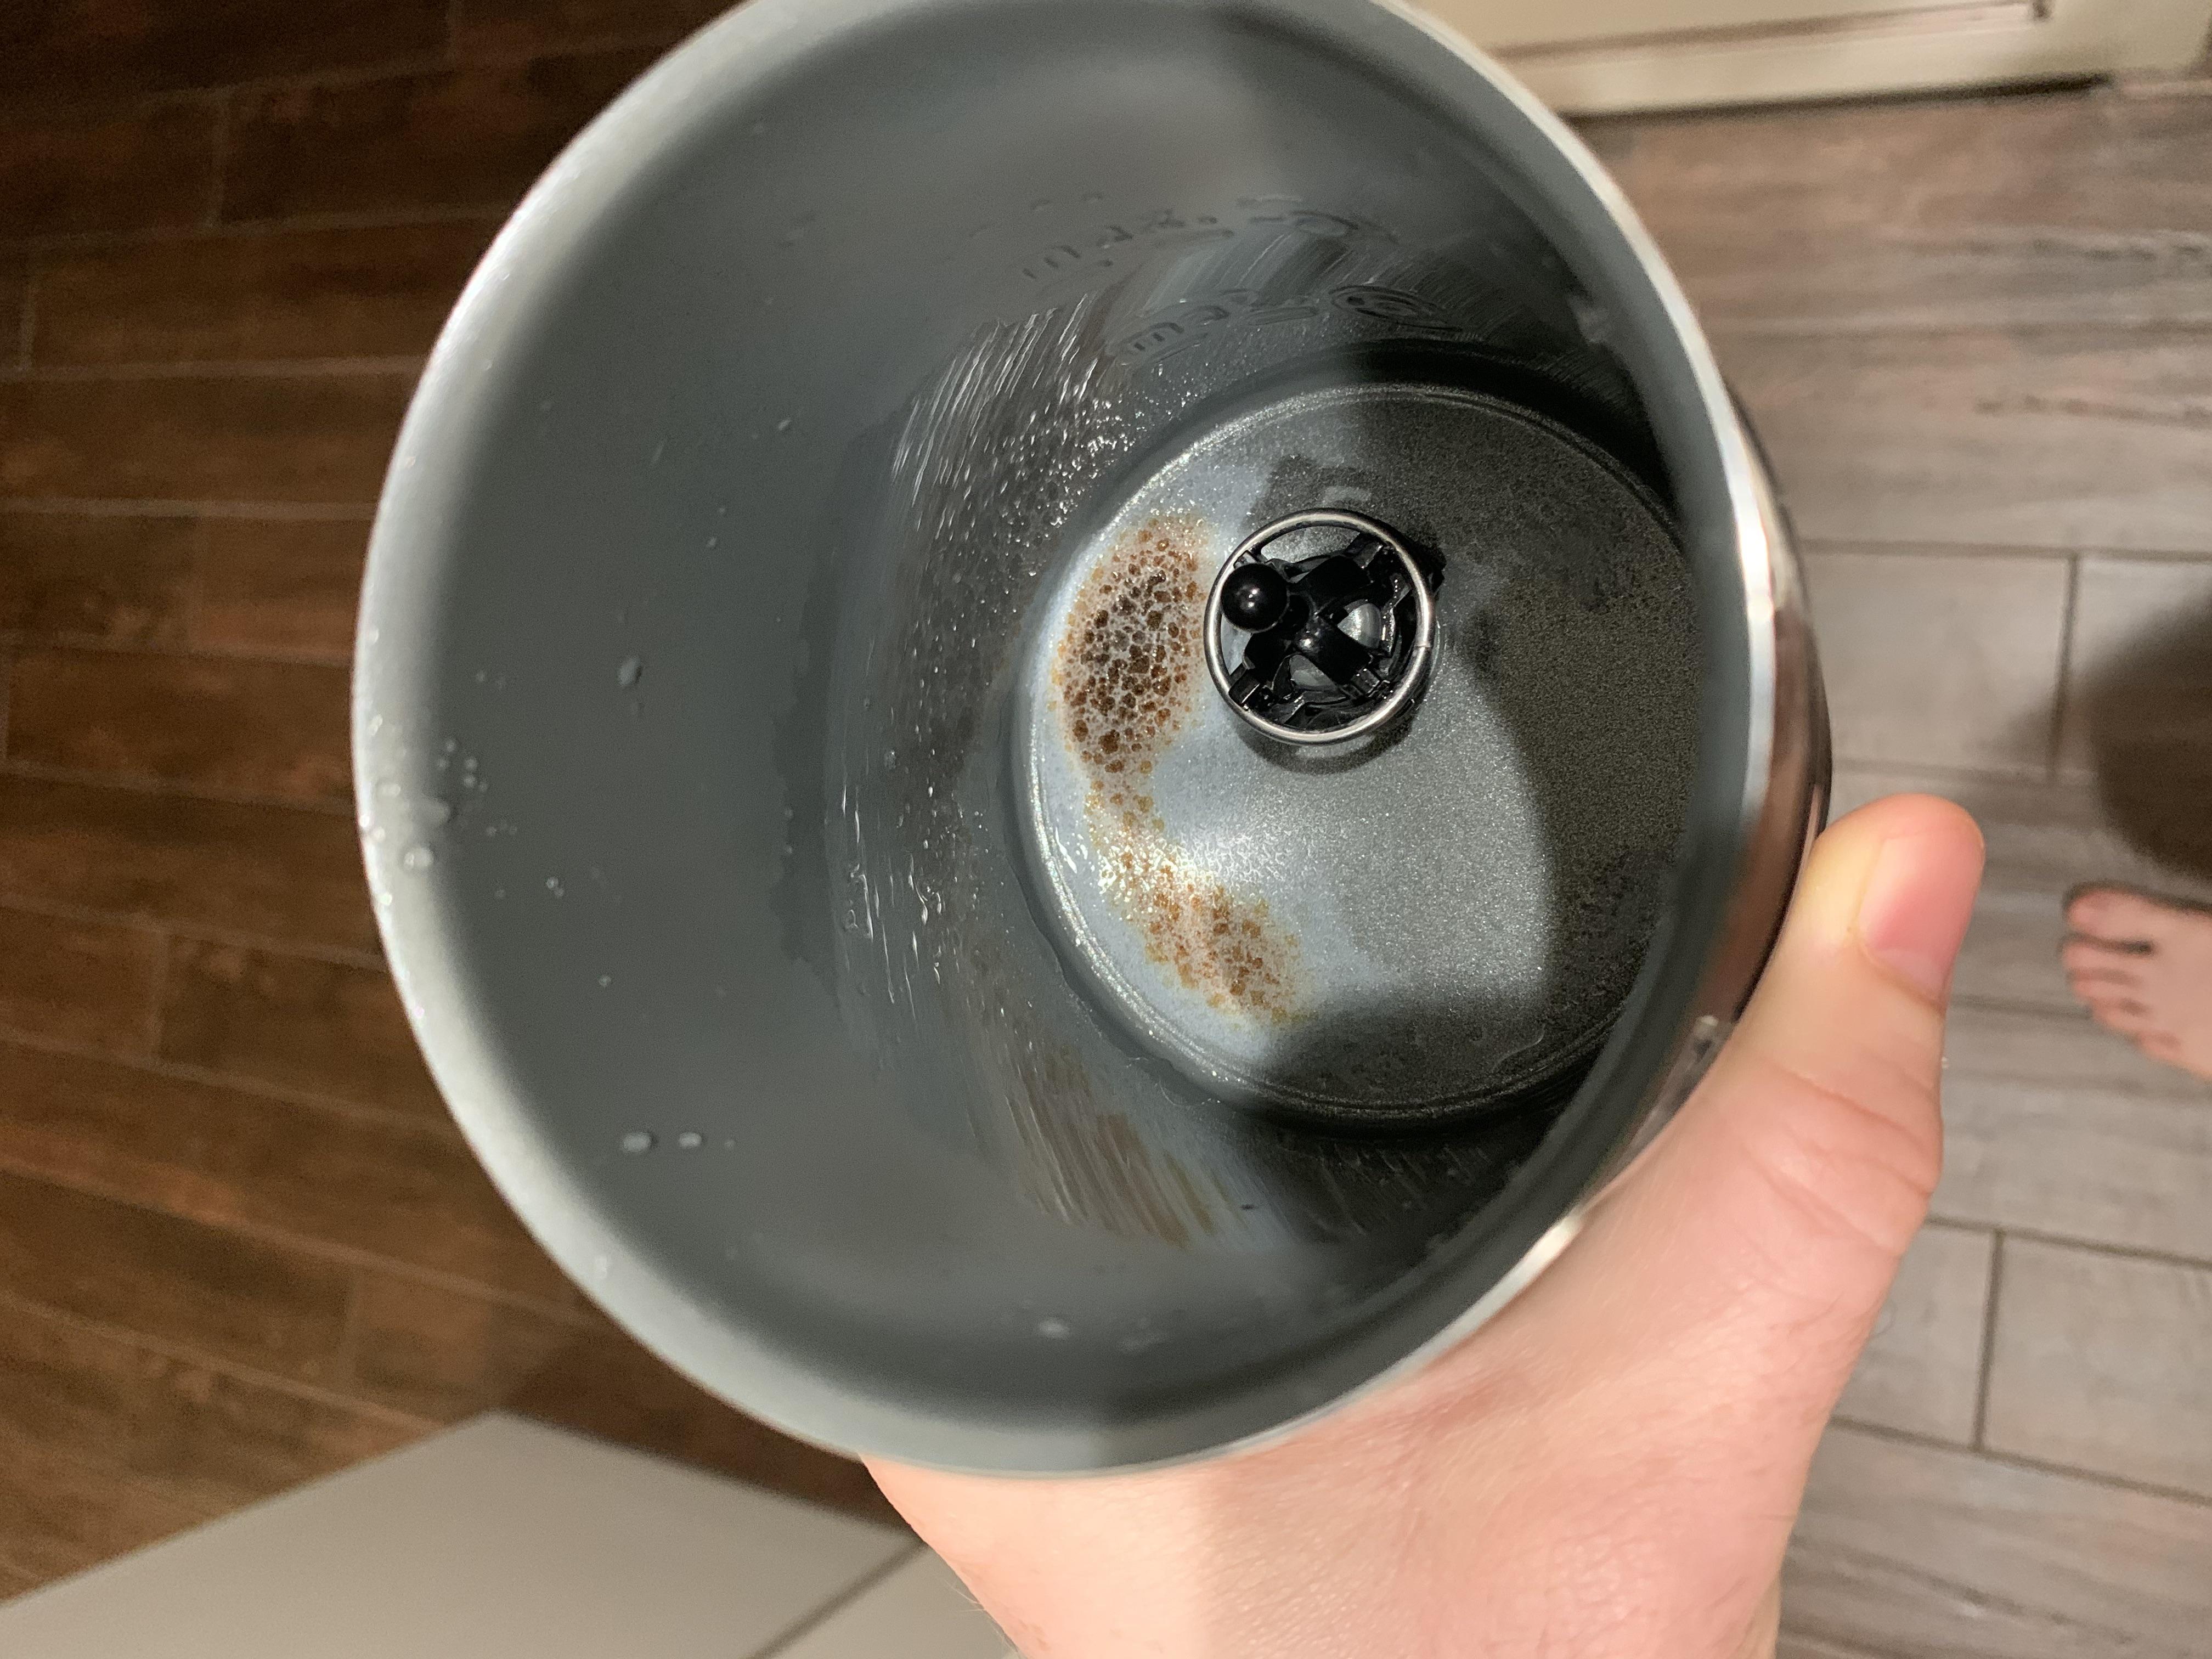 How to Clean a Nespresso Milk Frother? 